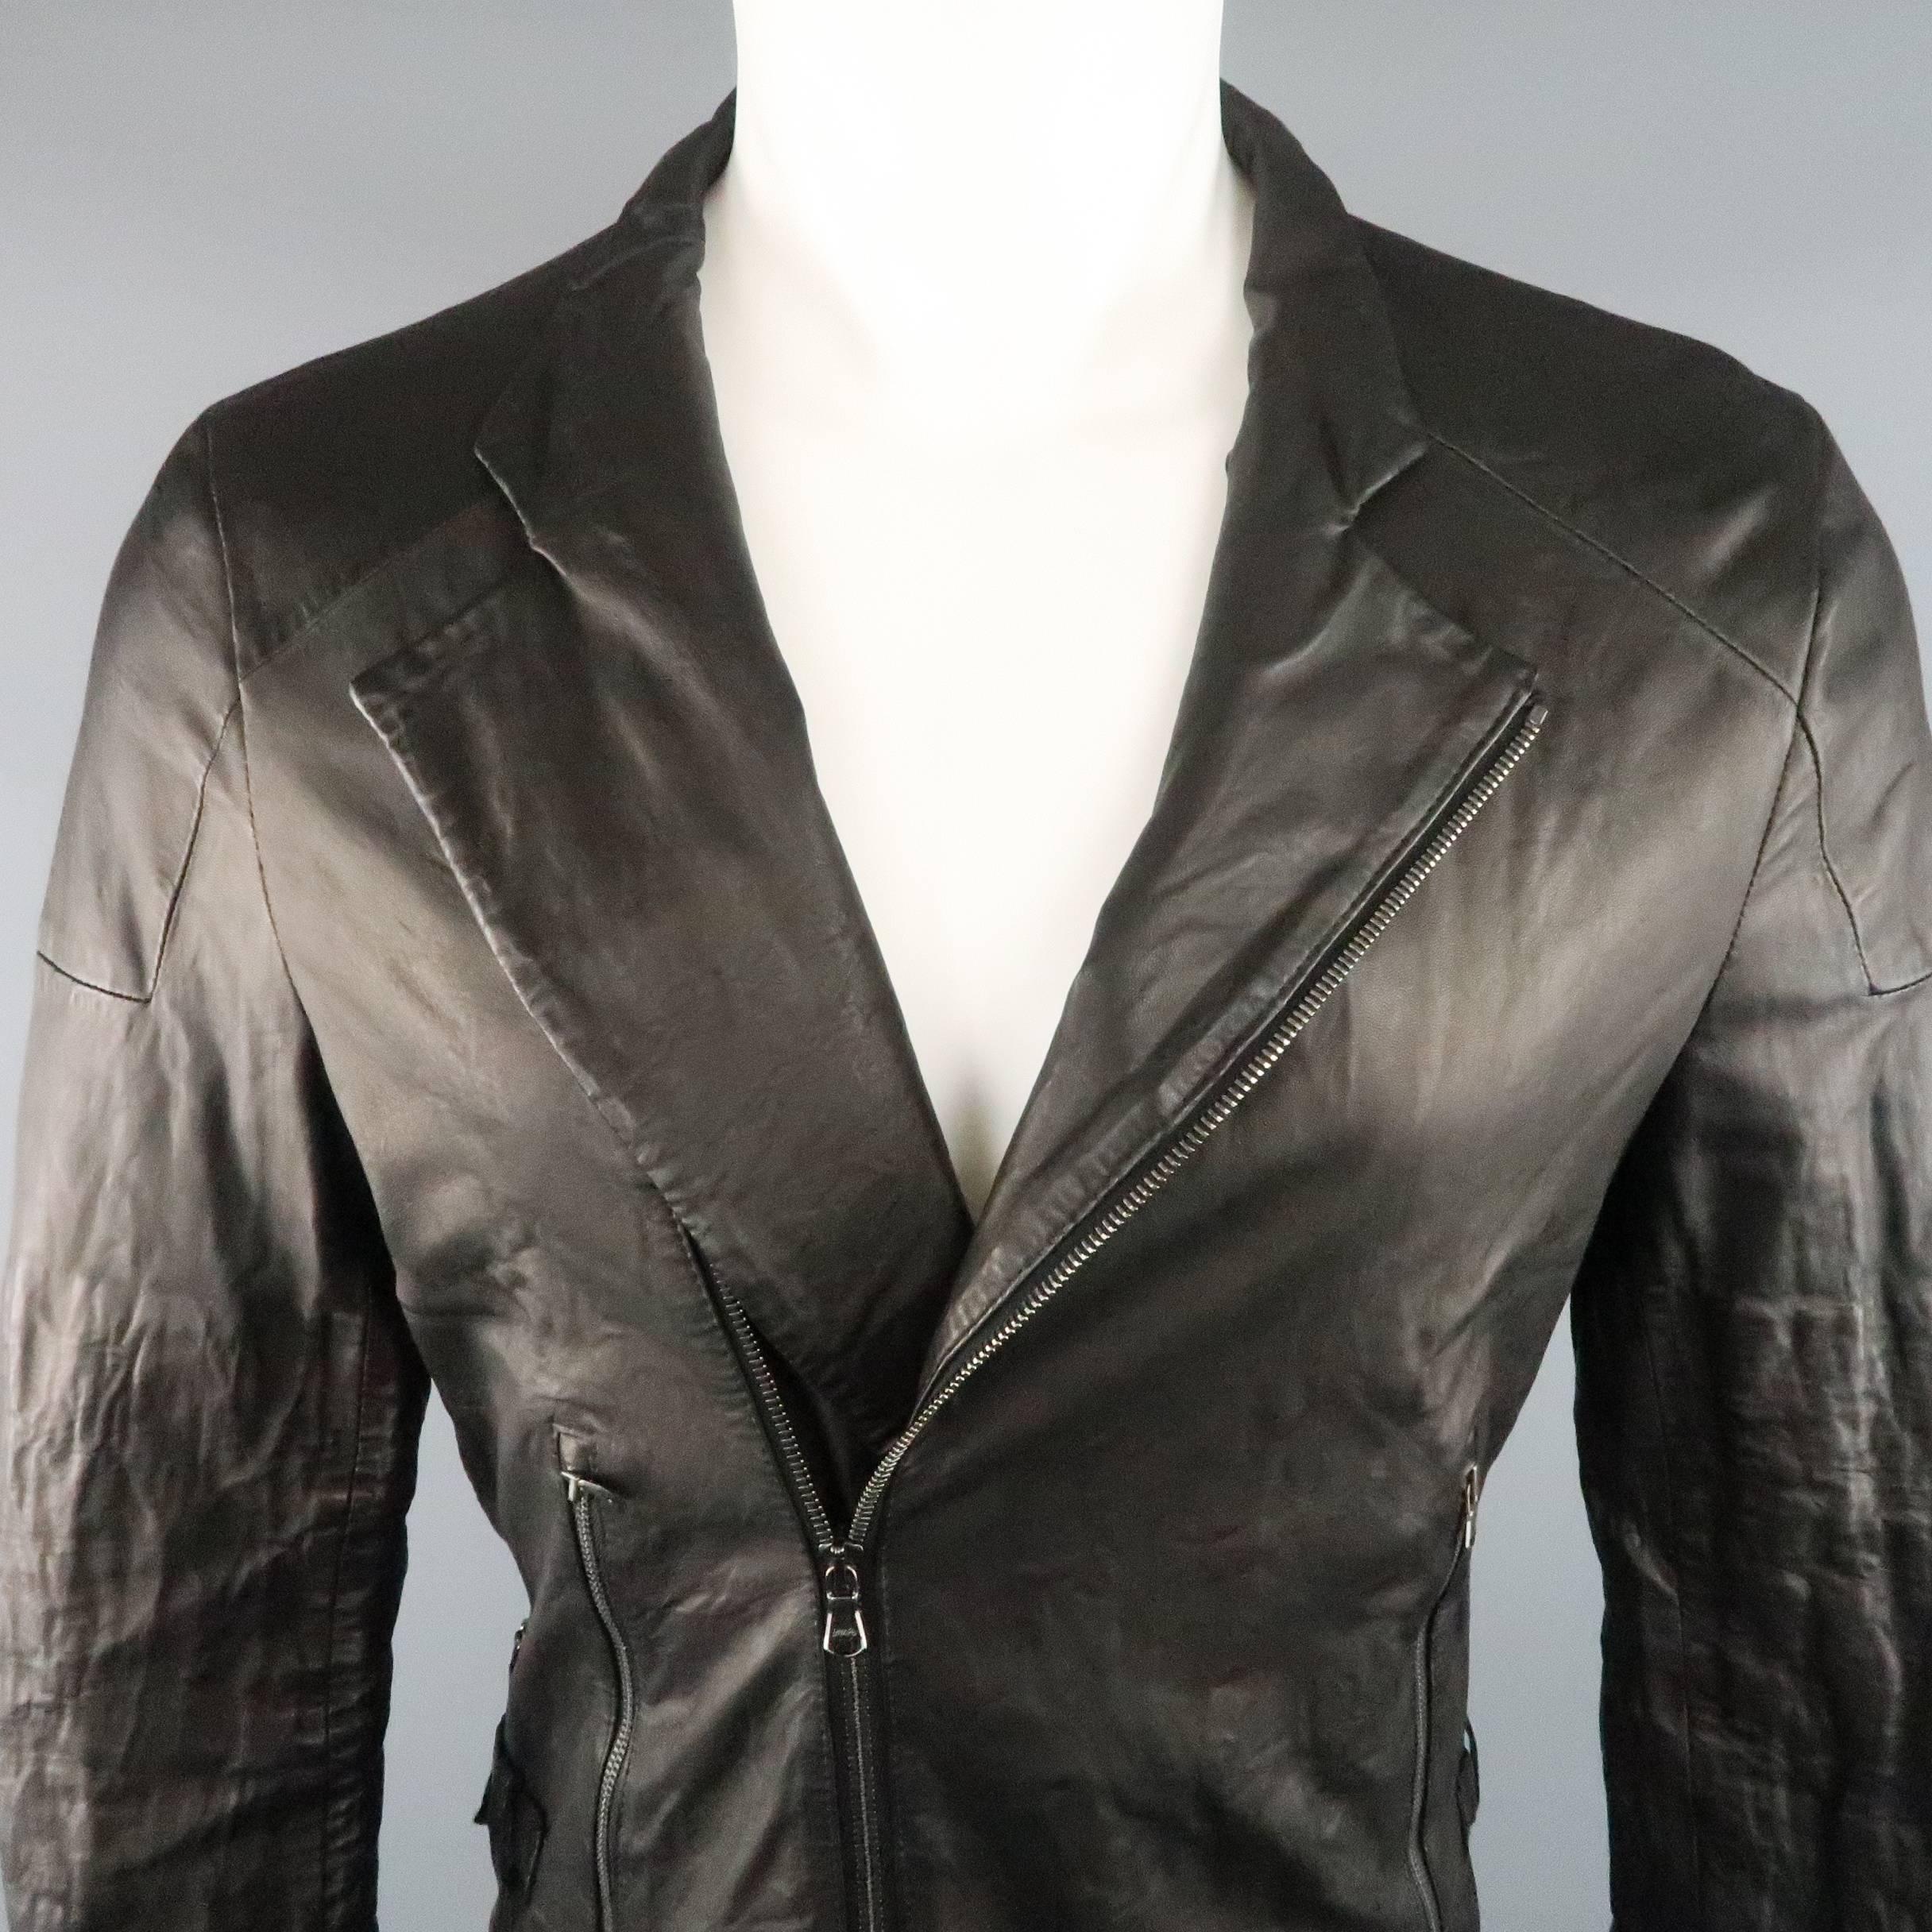 FORME 3’3204322896 biker style jacket comes in light weight wrinkle distressed leather and features an asymmetrical zip closure, pointed lapel, zip pockets, and belted tabs. Made in Italy.
 
Excellent Pre-Owned Condition.
Marked: IT 50
